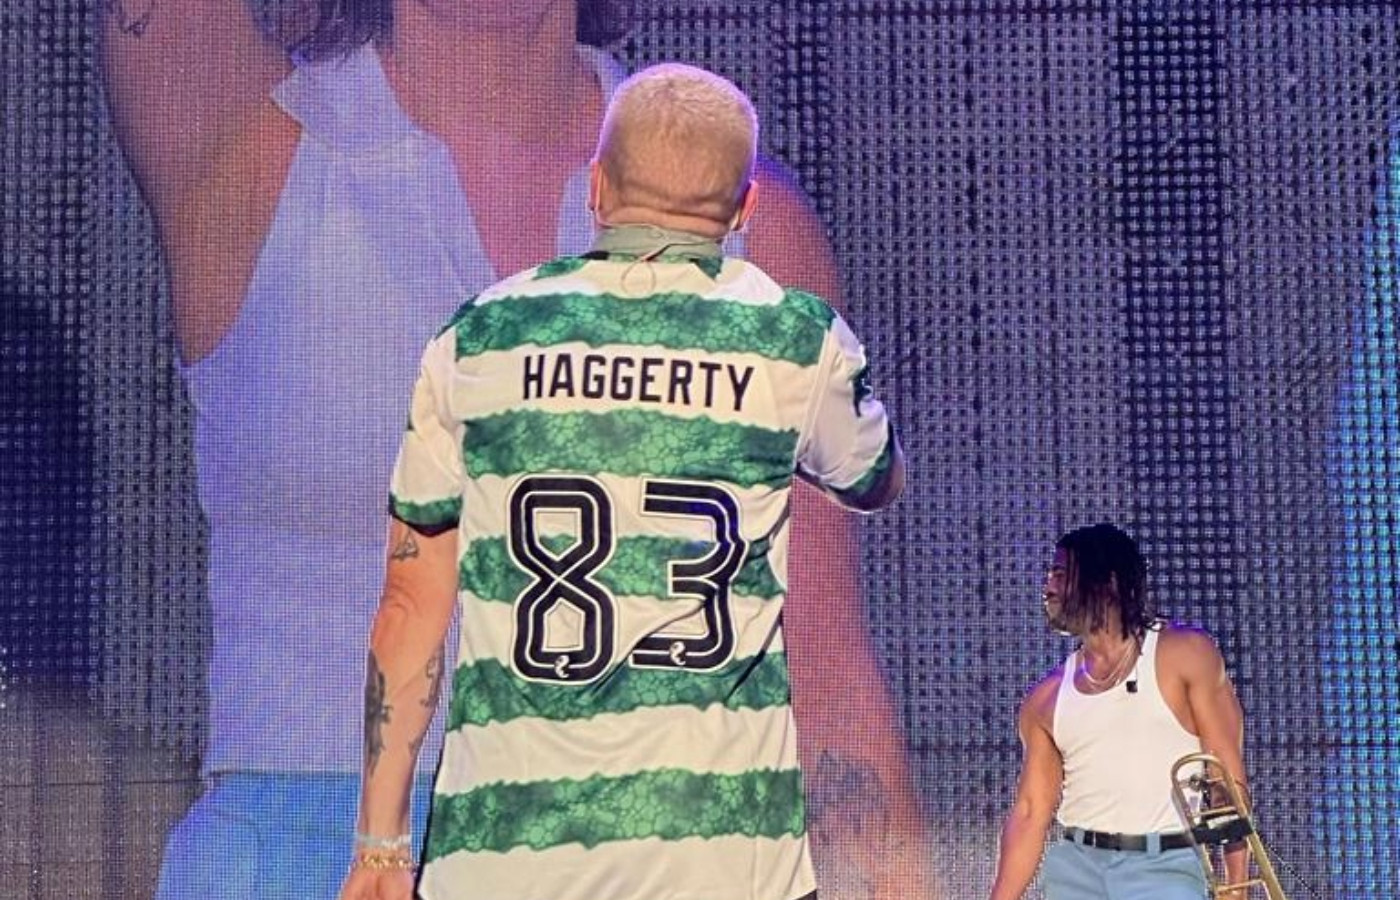 Macklemore performing in a Celtic shirt at New York show.